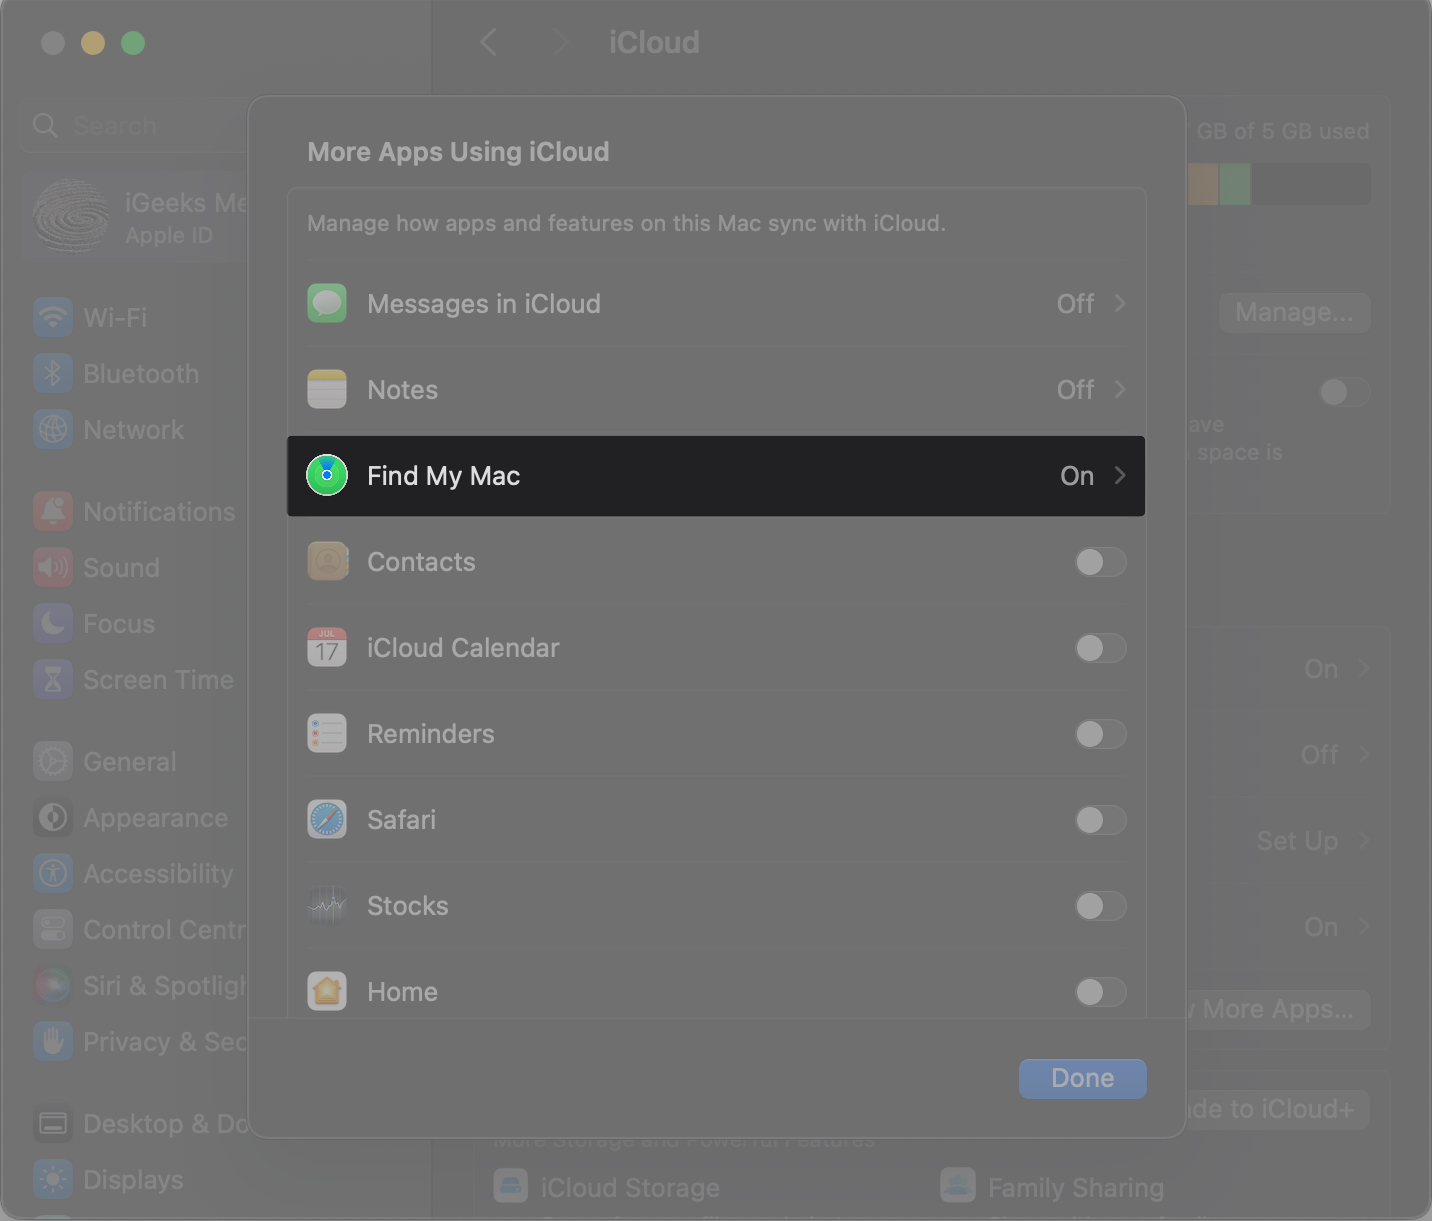 Find my mac under more apps using iCloud